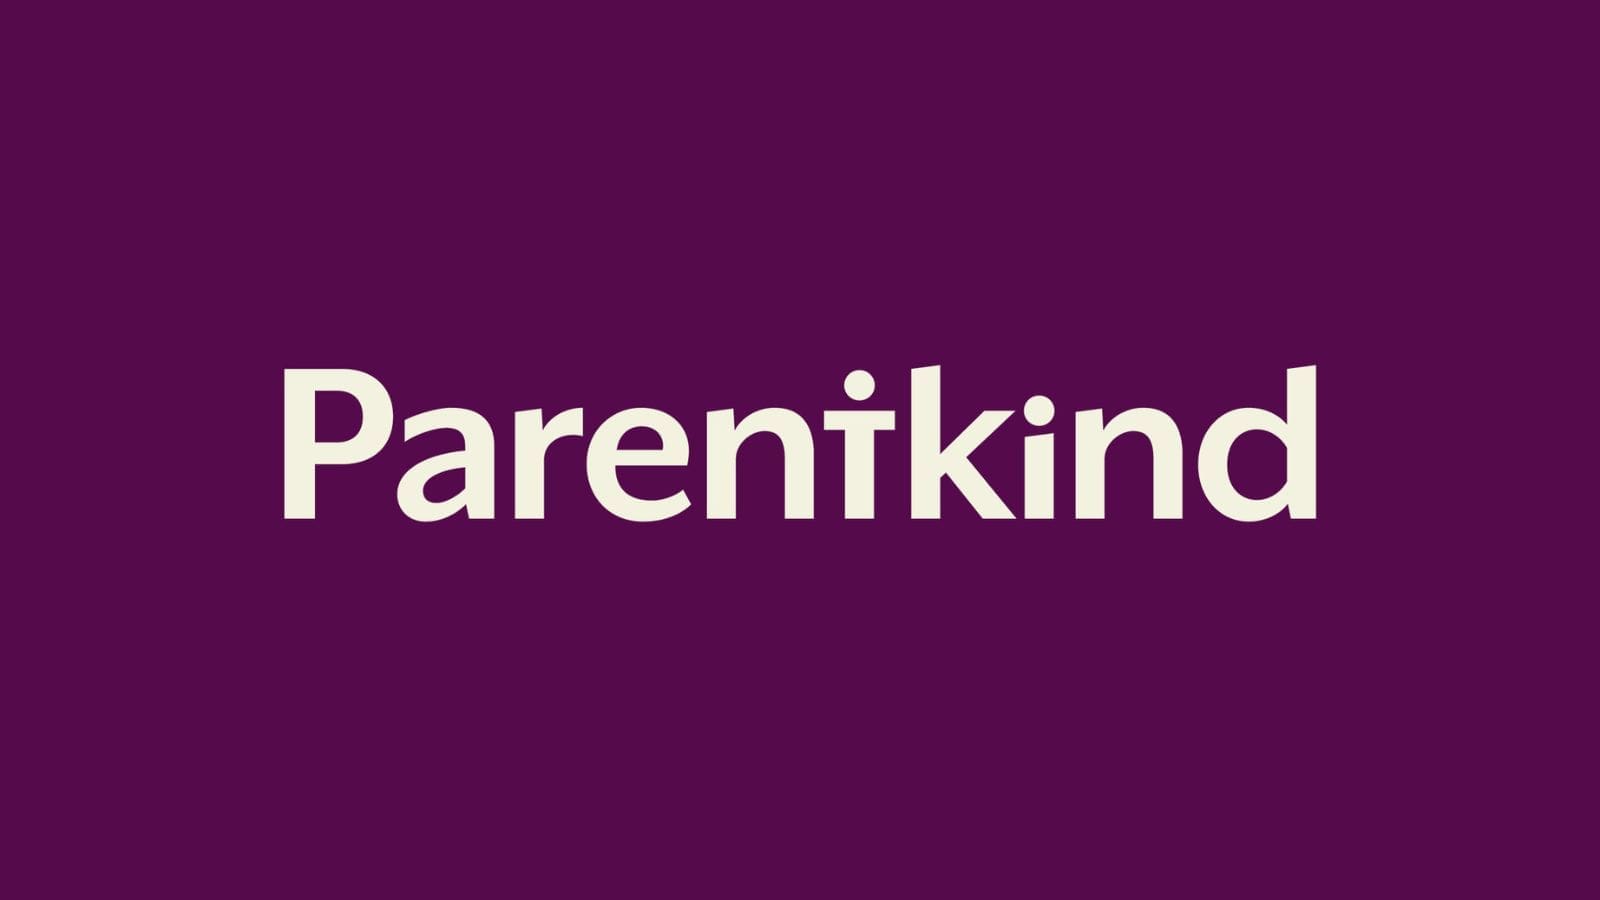 The word "Parentkind" in white with a purple background.